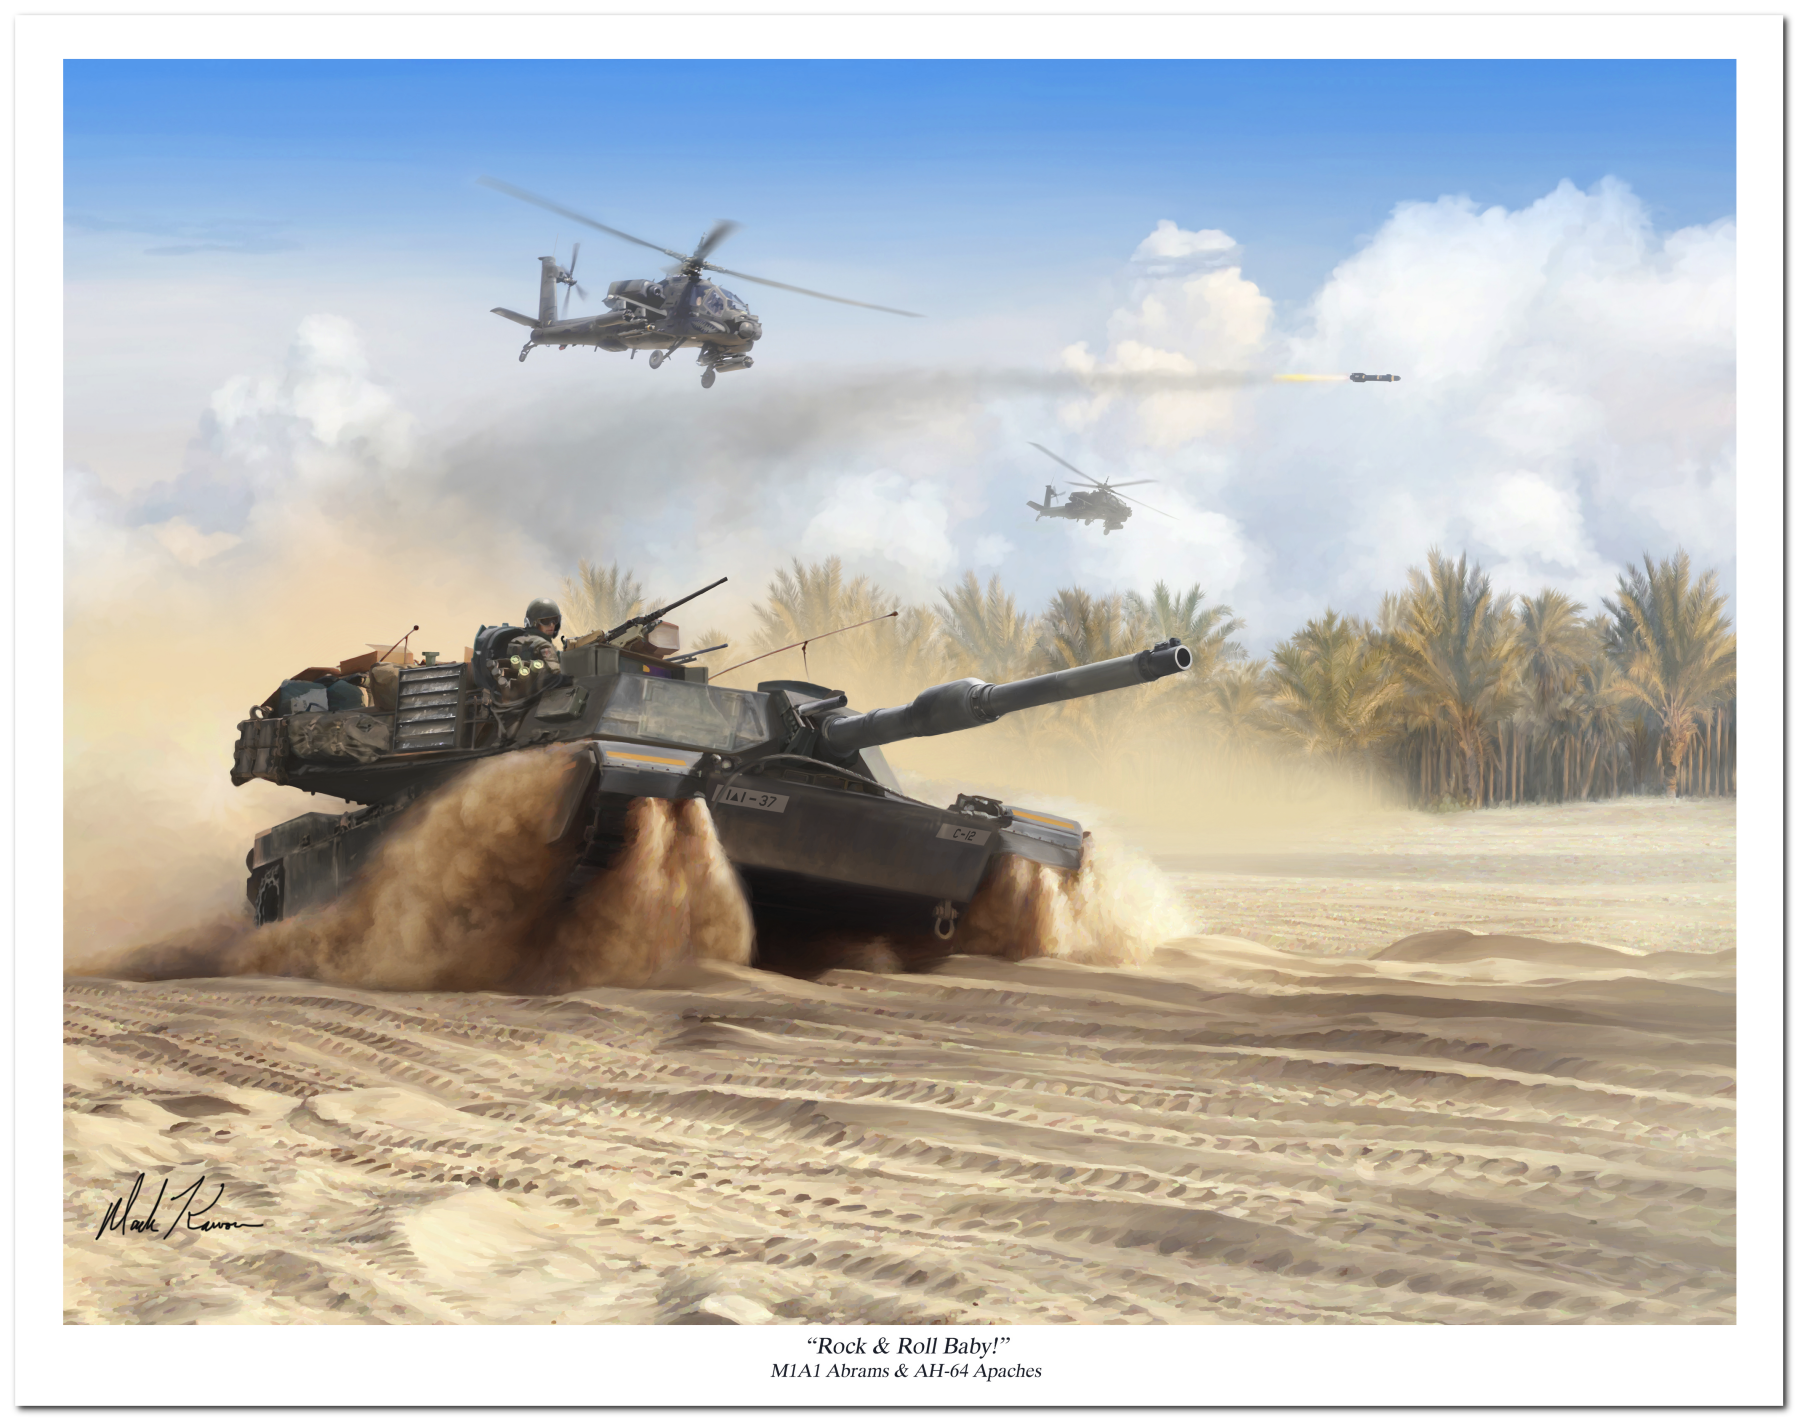 "Rock & Roll Baby" by Mark Karvon featuring the M1A1 Abrams main battle tank